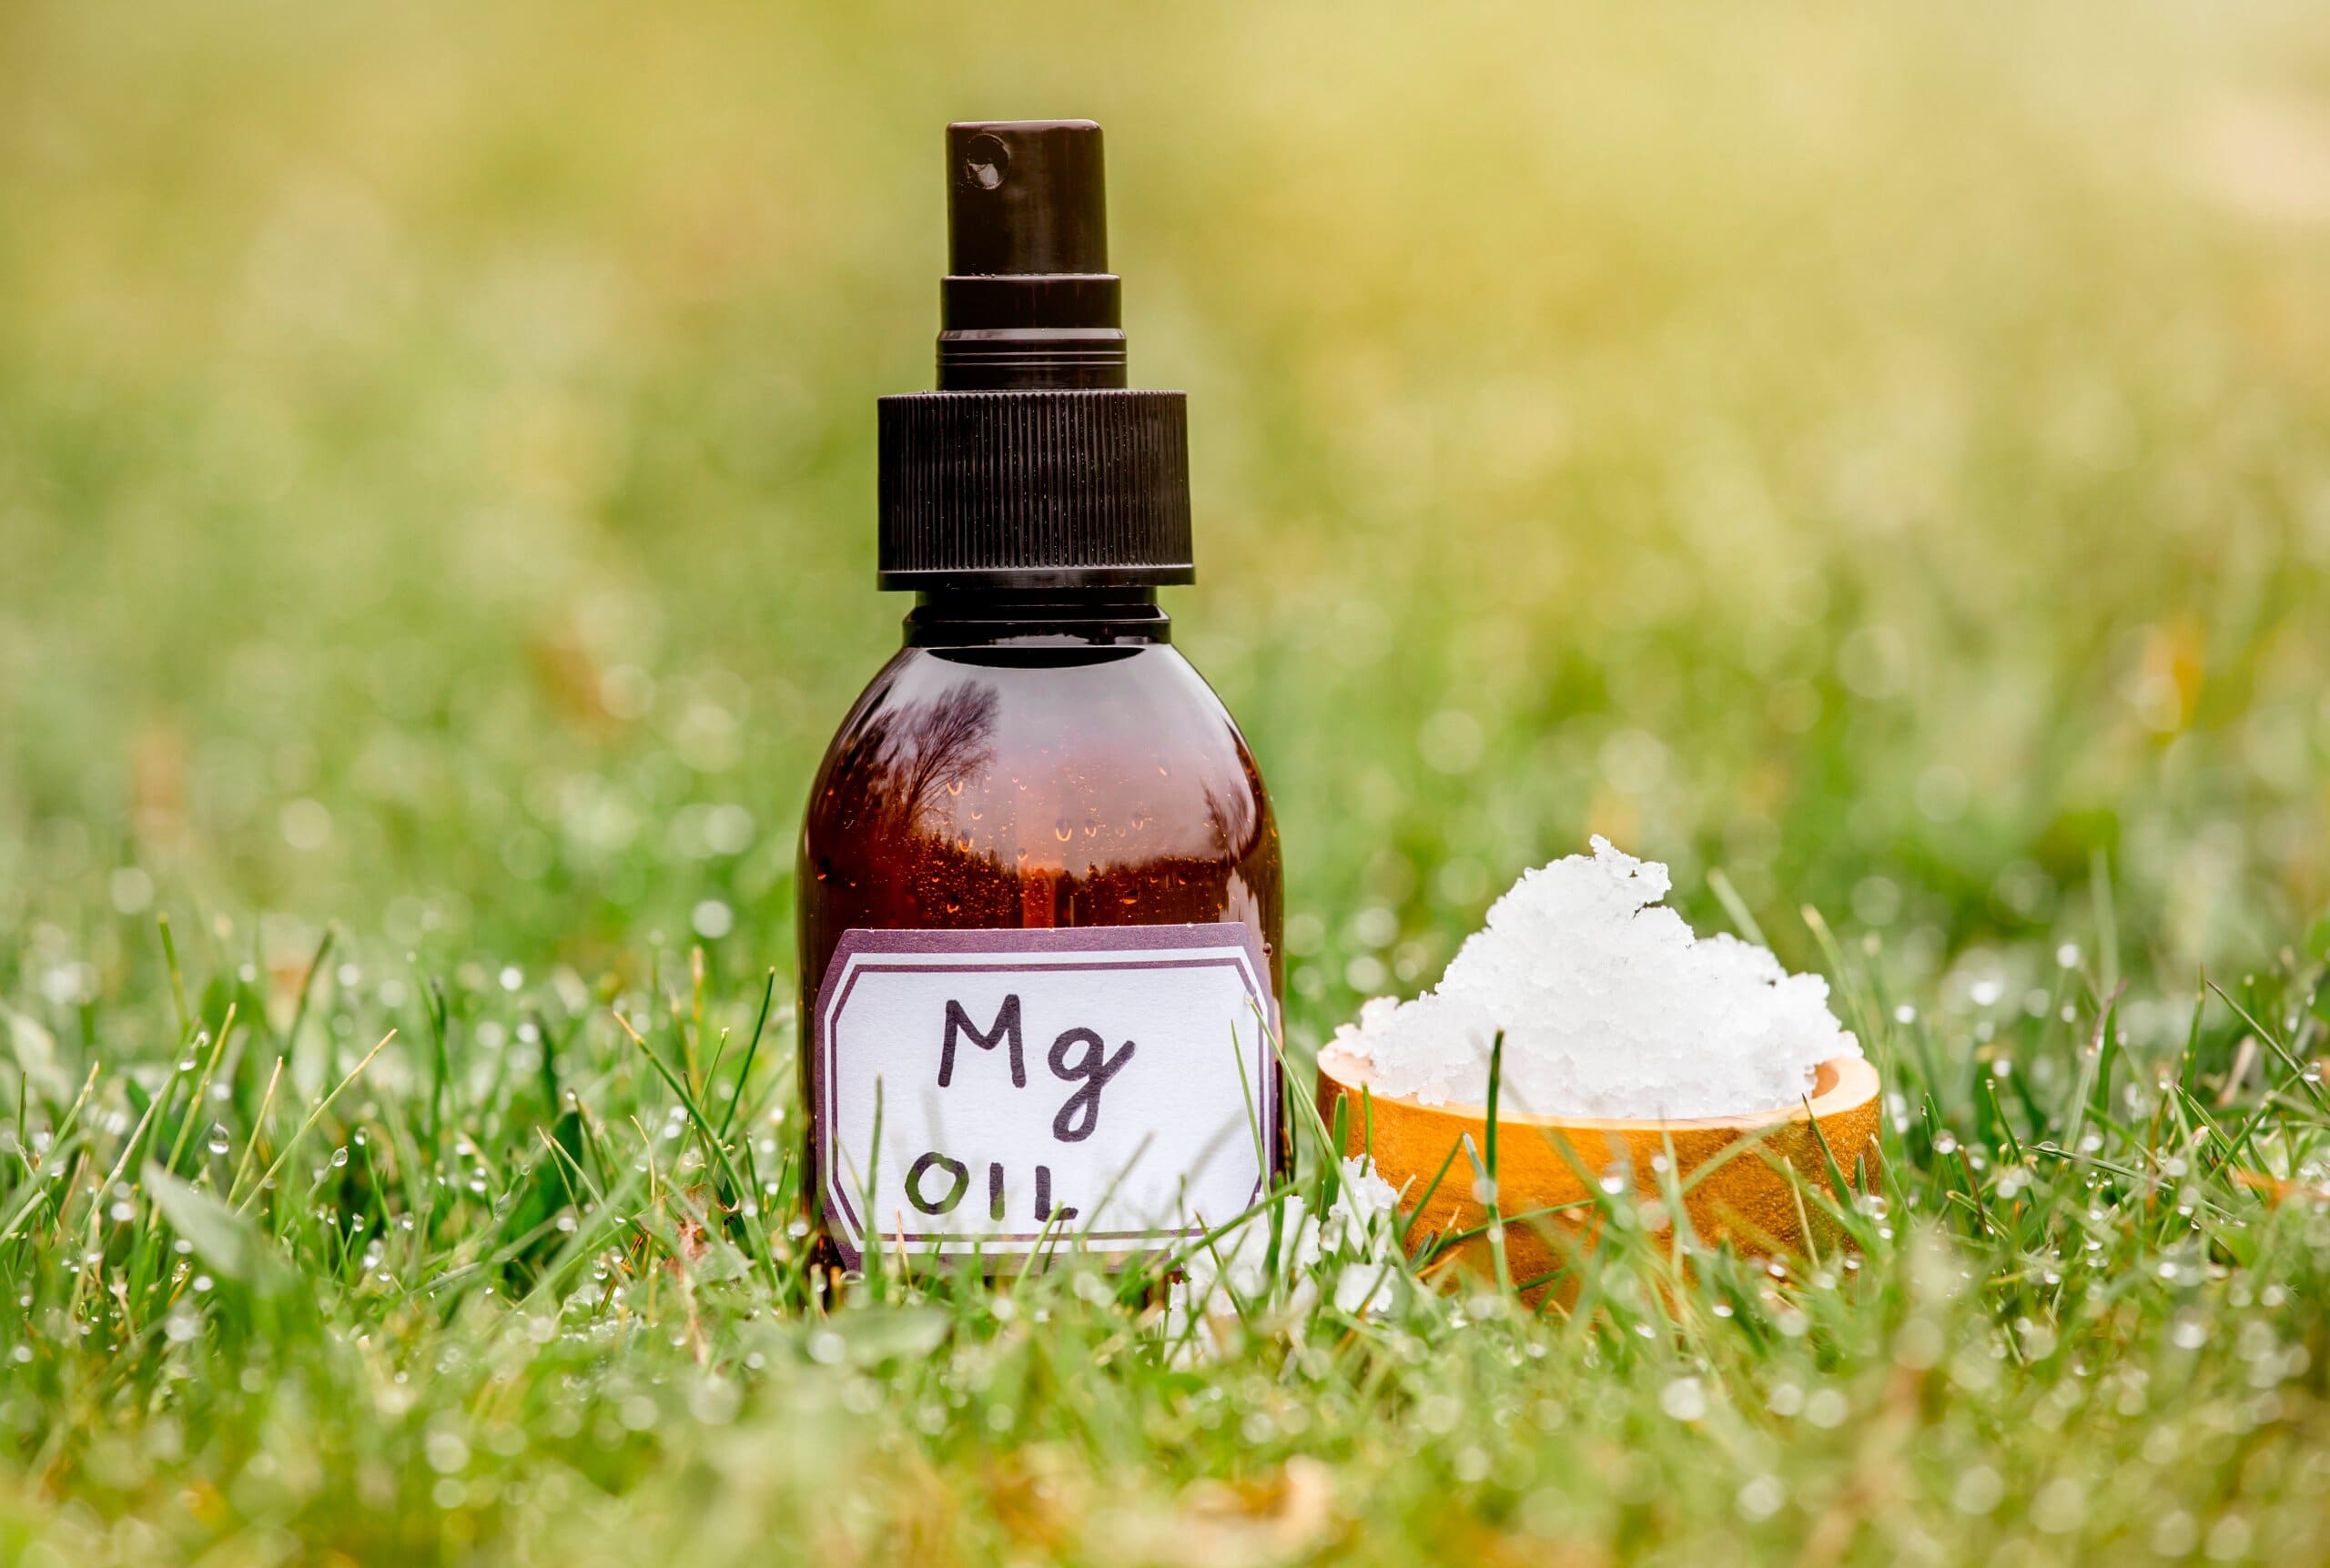 A spray bottle of magnesium oil next to a small wooden bowl of magnesium flakes on grass.